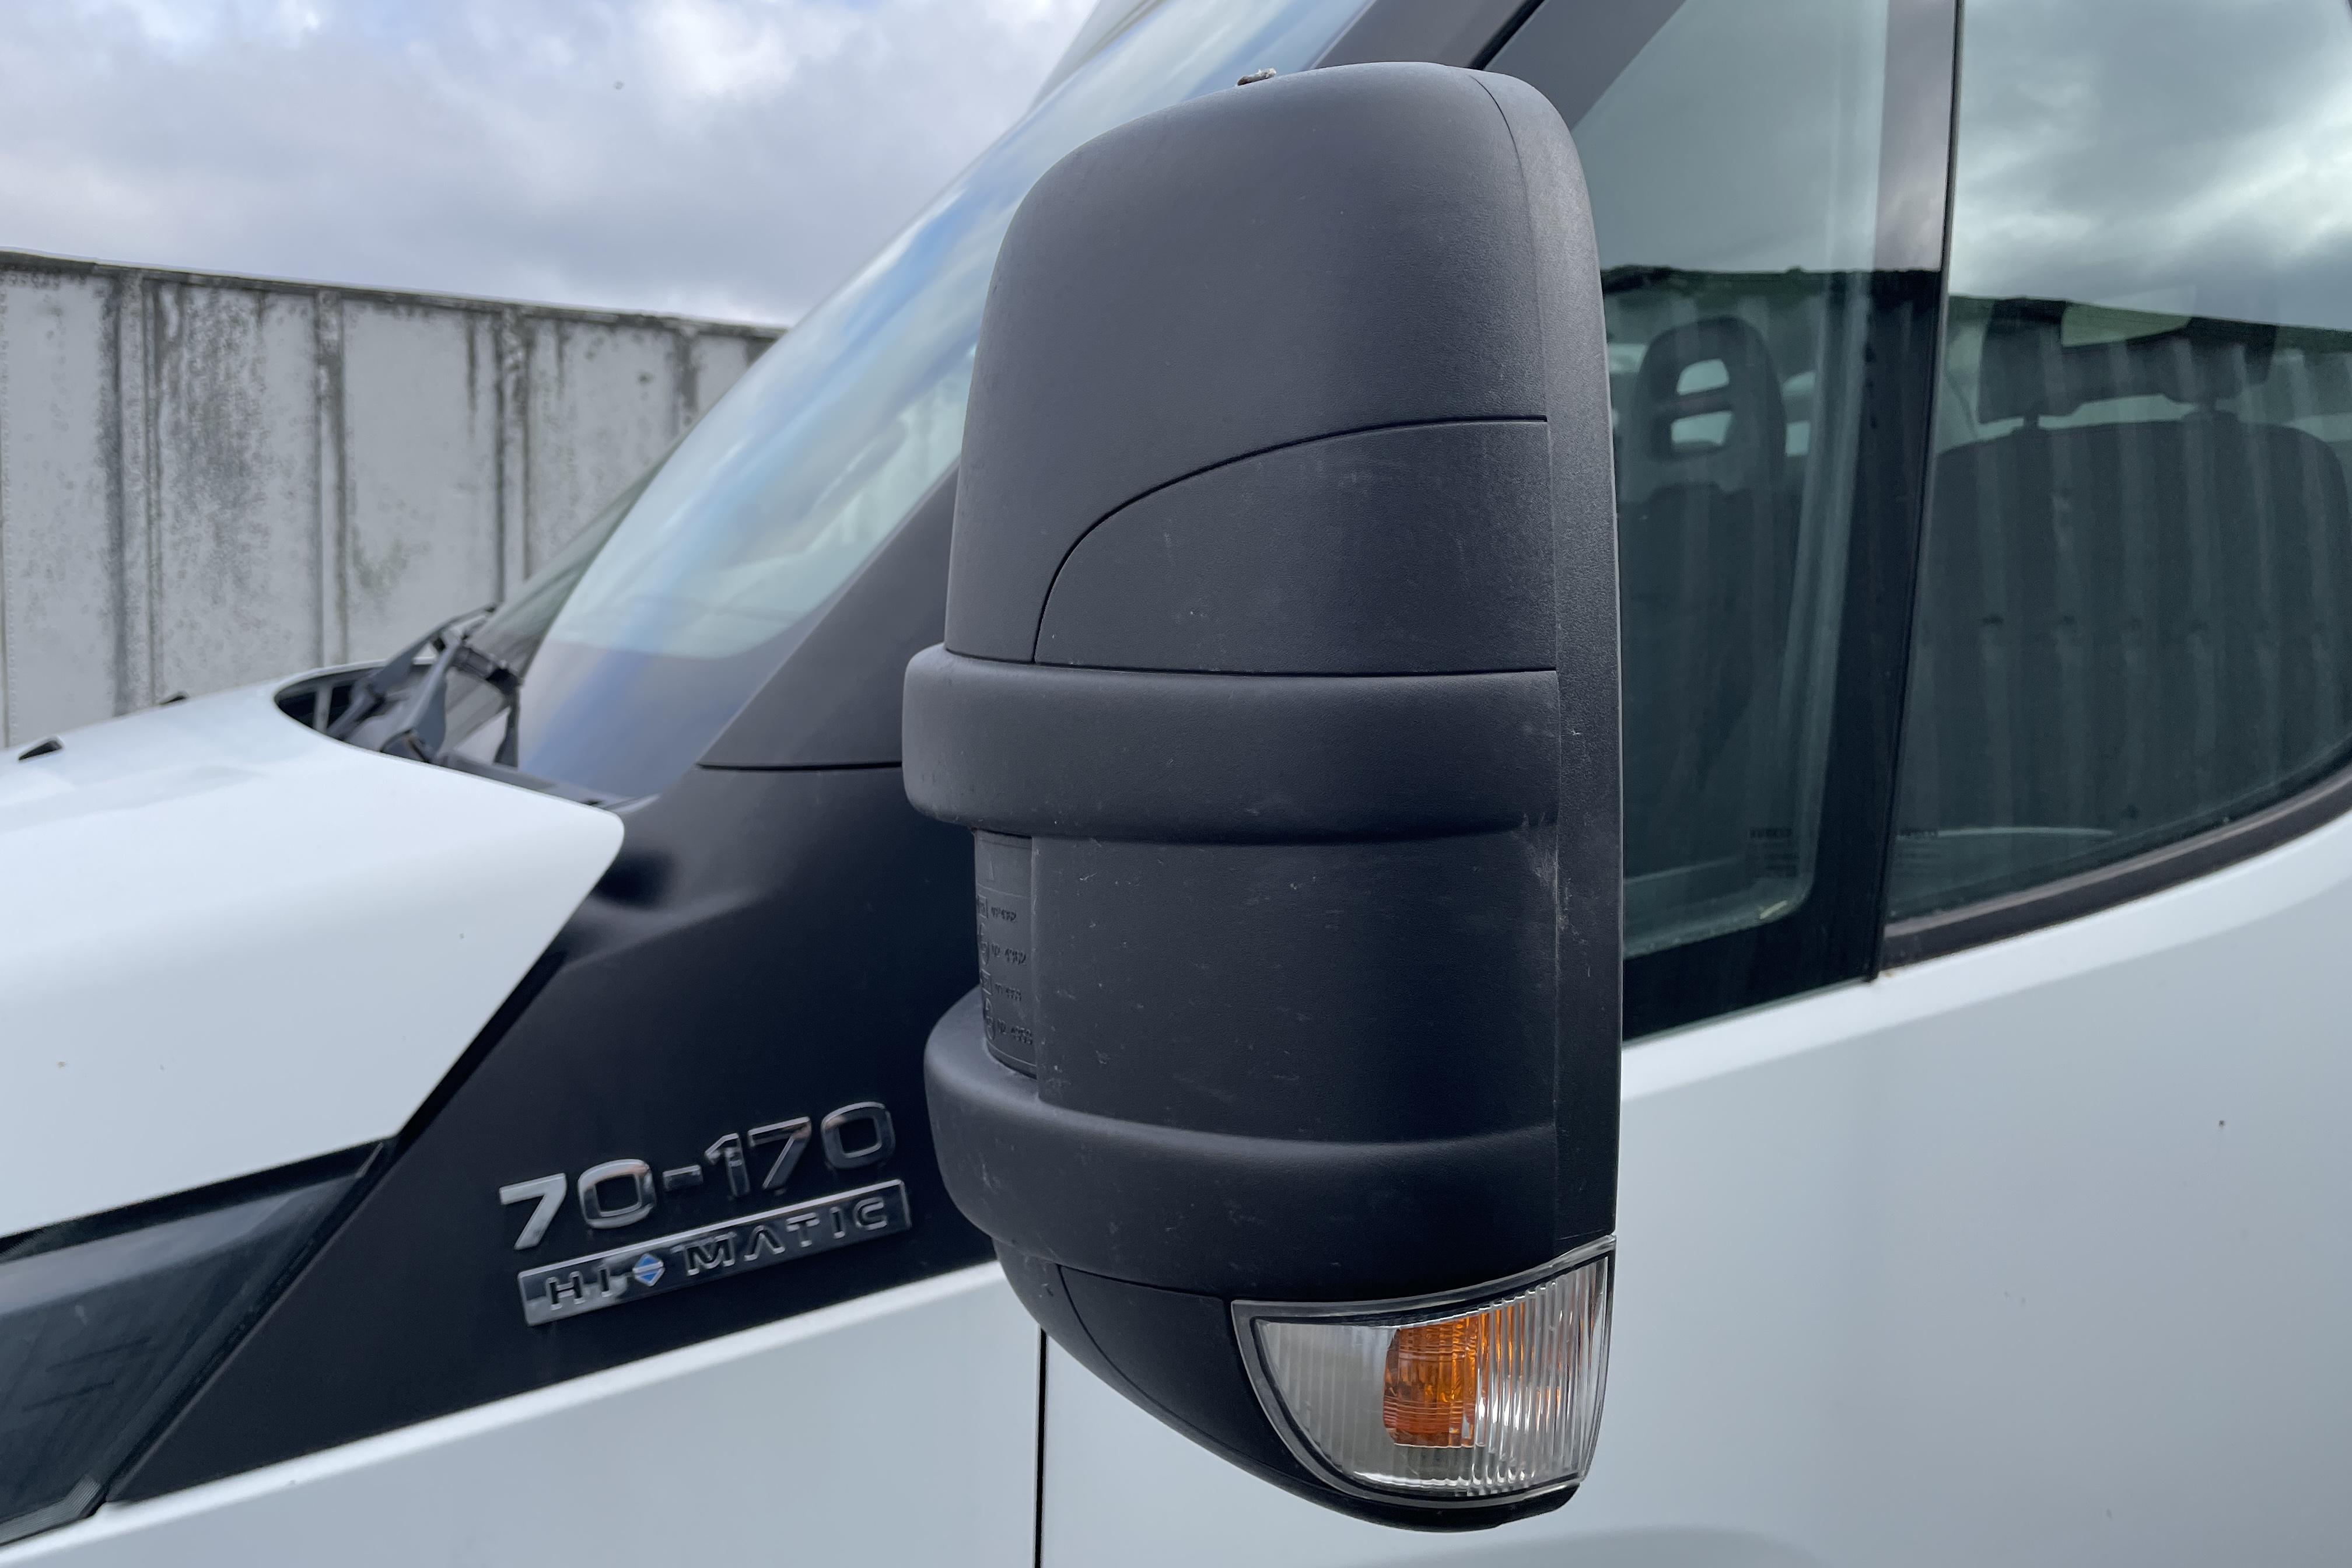 Iveco DAILY 70 - 0 km - Automatic - white - 2015